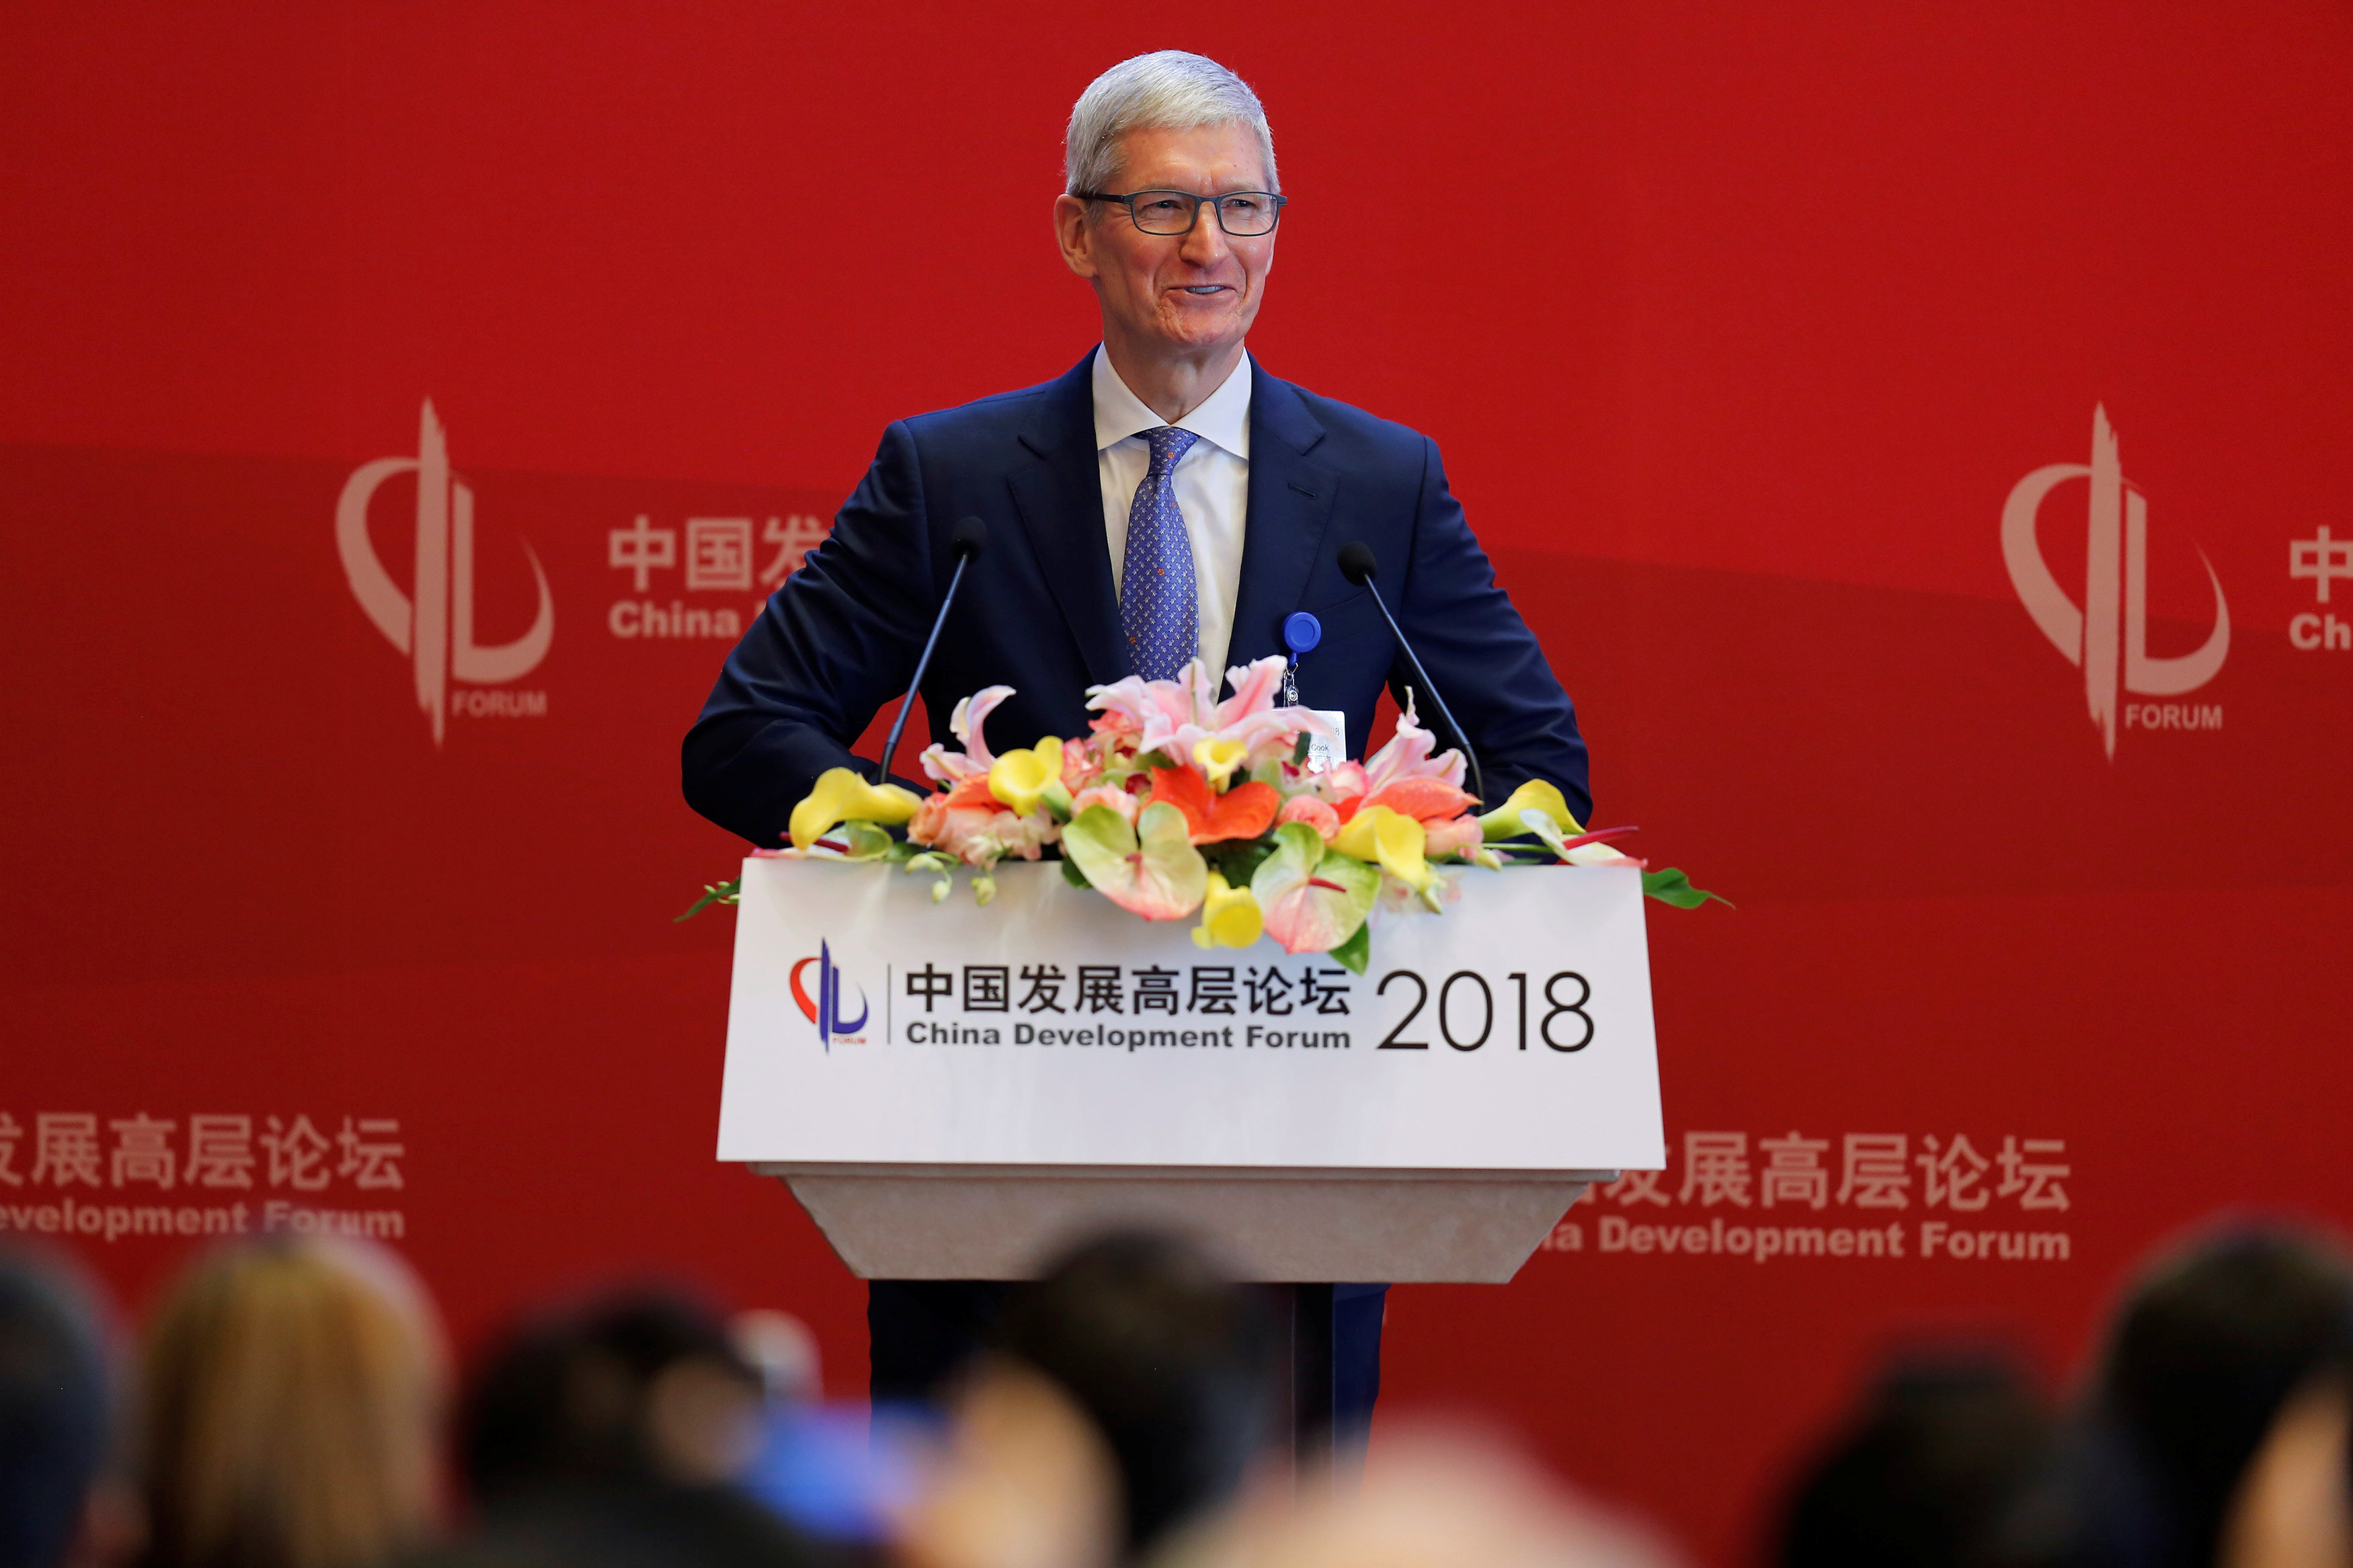 Apple Inc's Chief Executive Officer Tim Cook speaks at the China Development Forum in Beijing, China March 24, 2018. REUTERS/Stringer ATTENTION EDITORS - THIS IMAGE WAS PROVIDED BY A THIRD PARTY. CHINA OUT.